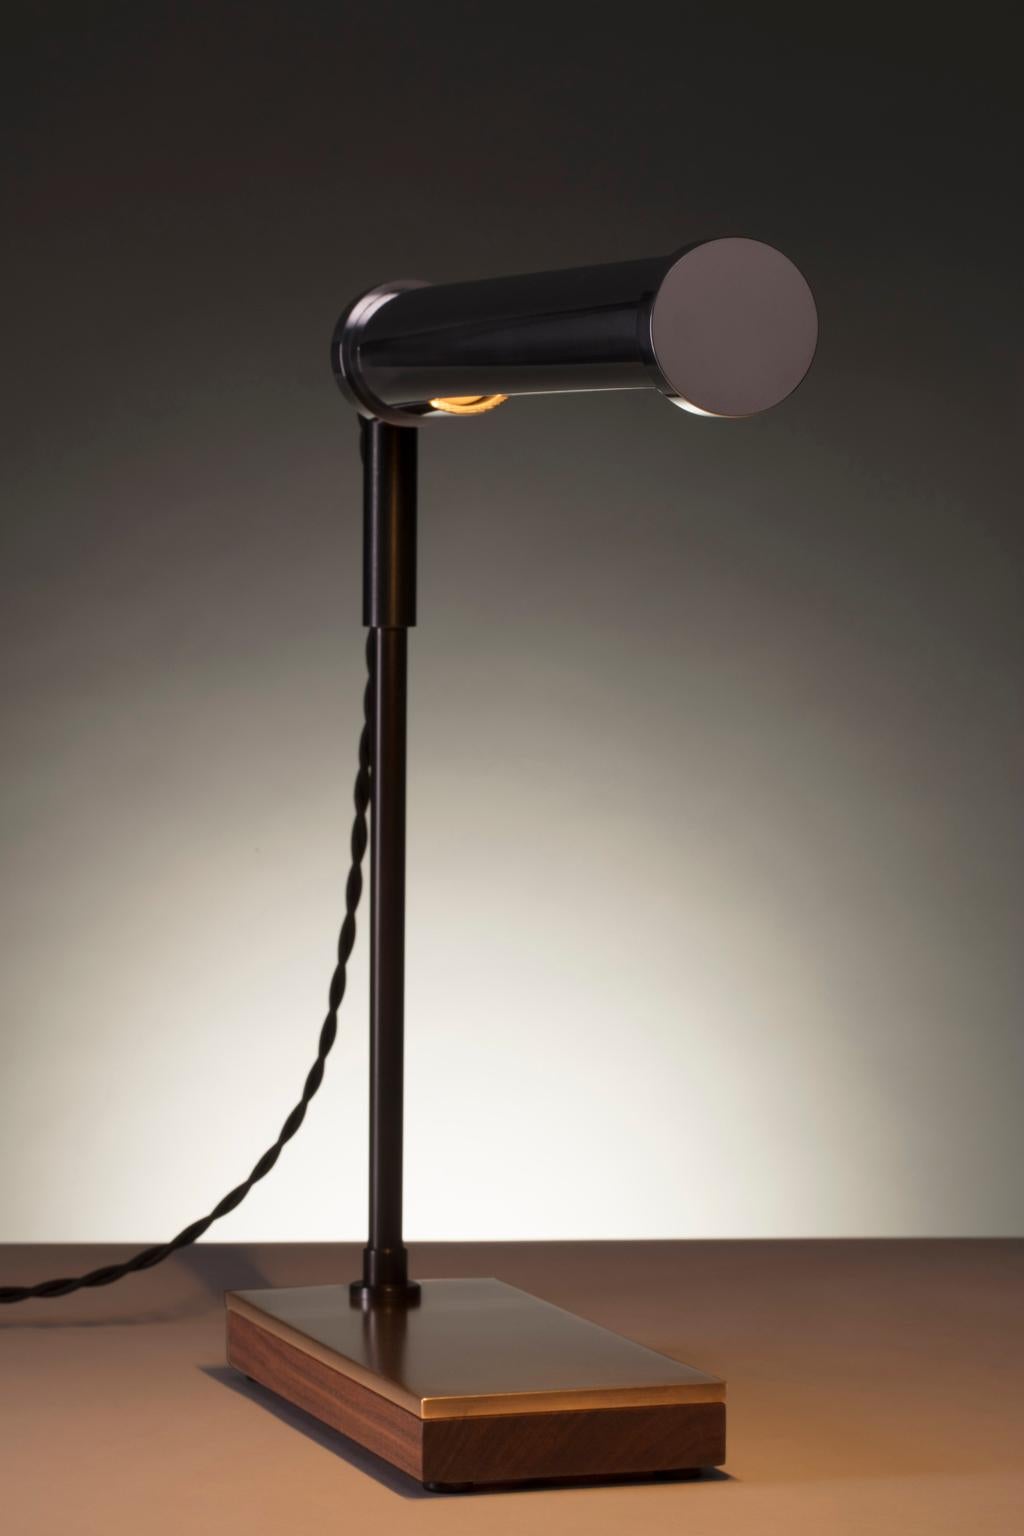 Collection I: Cylinder lamp

Inspired by the streamlined forms found in aviation design, the high polish aluminum cylinder that houses the fixture’s LED light source cantilevers over the base, as if in flight.

Available with a warm amber or